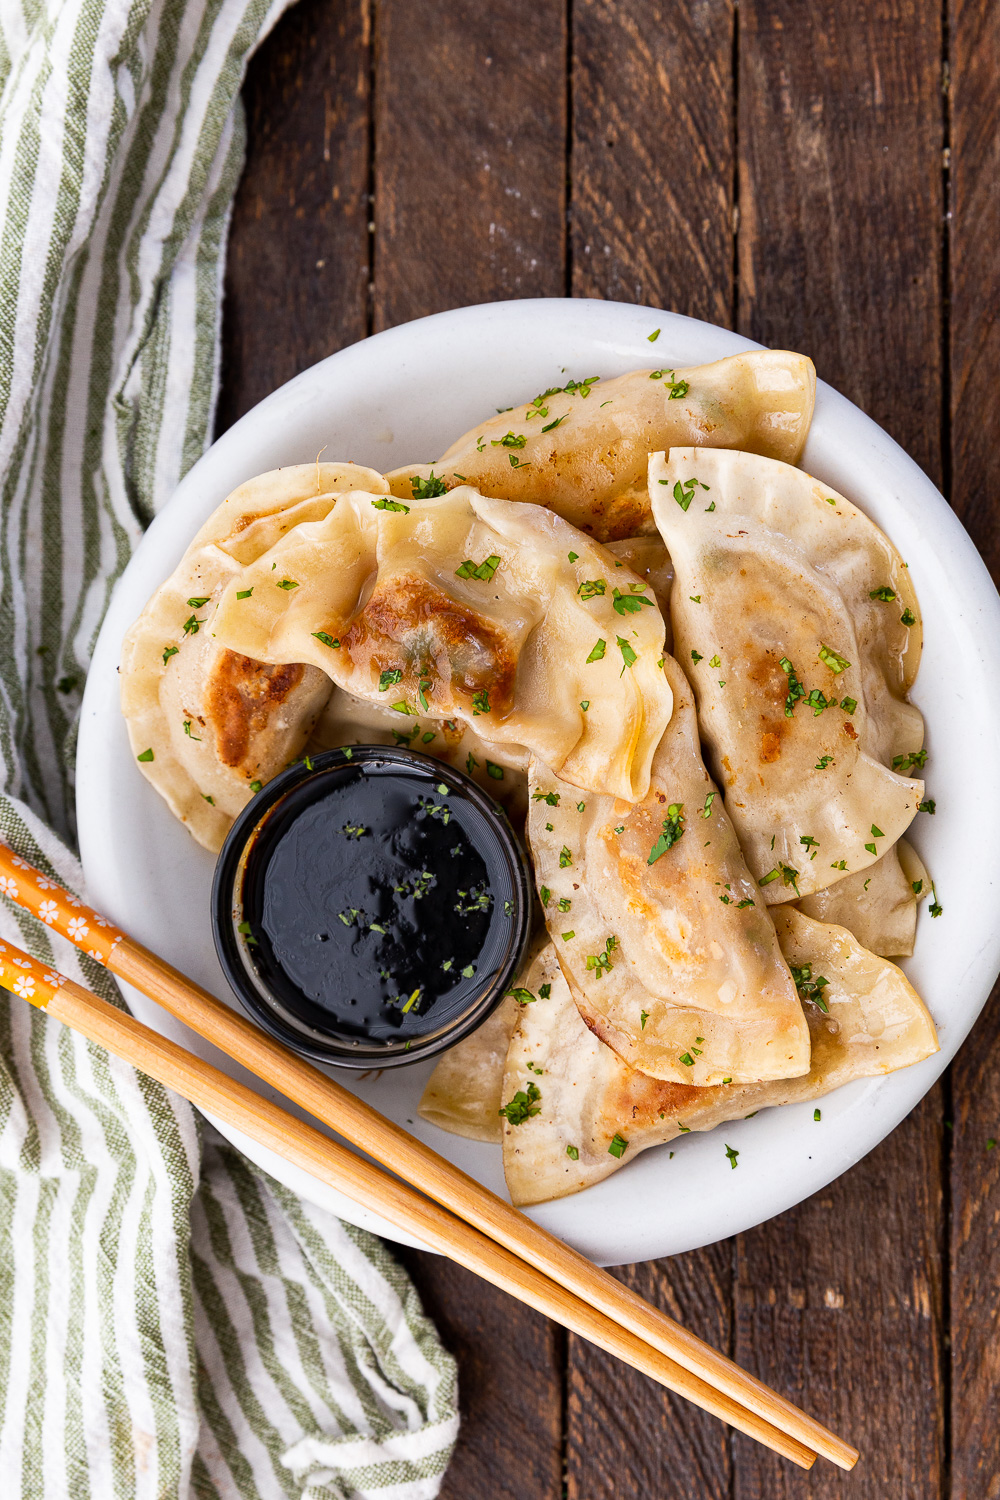 Amazing pork dumplings, pan fried and steamed and loaded with a tasty pork and cabbage filling. 